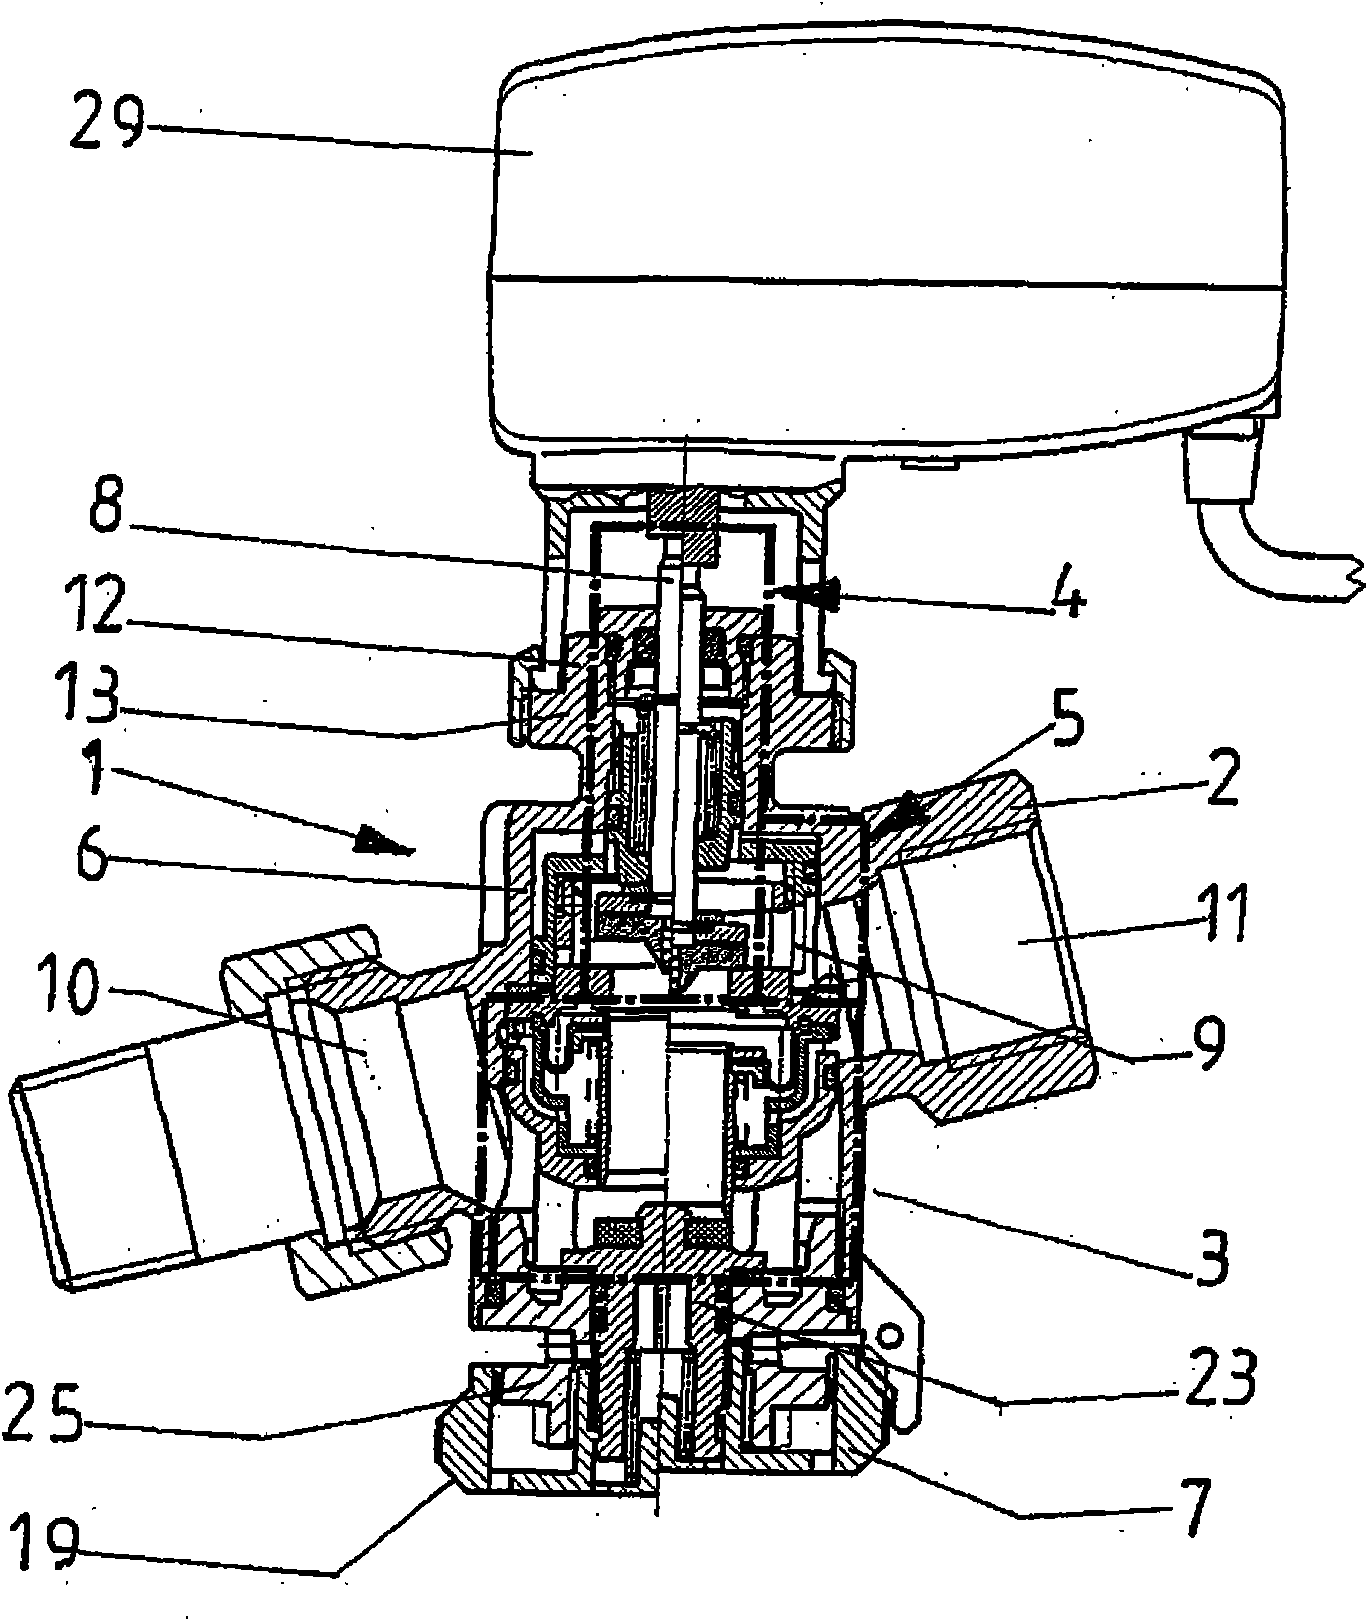 Valve combination for regulating the flow rate or differential pressure